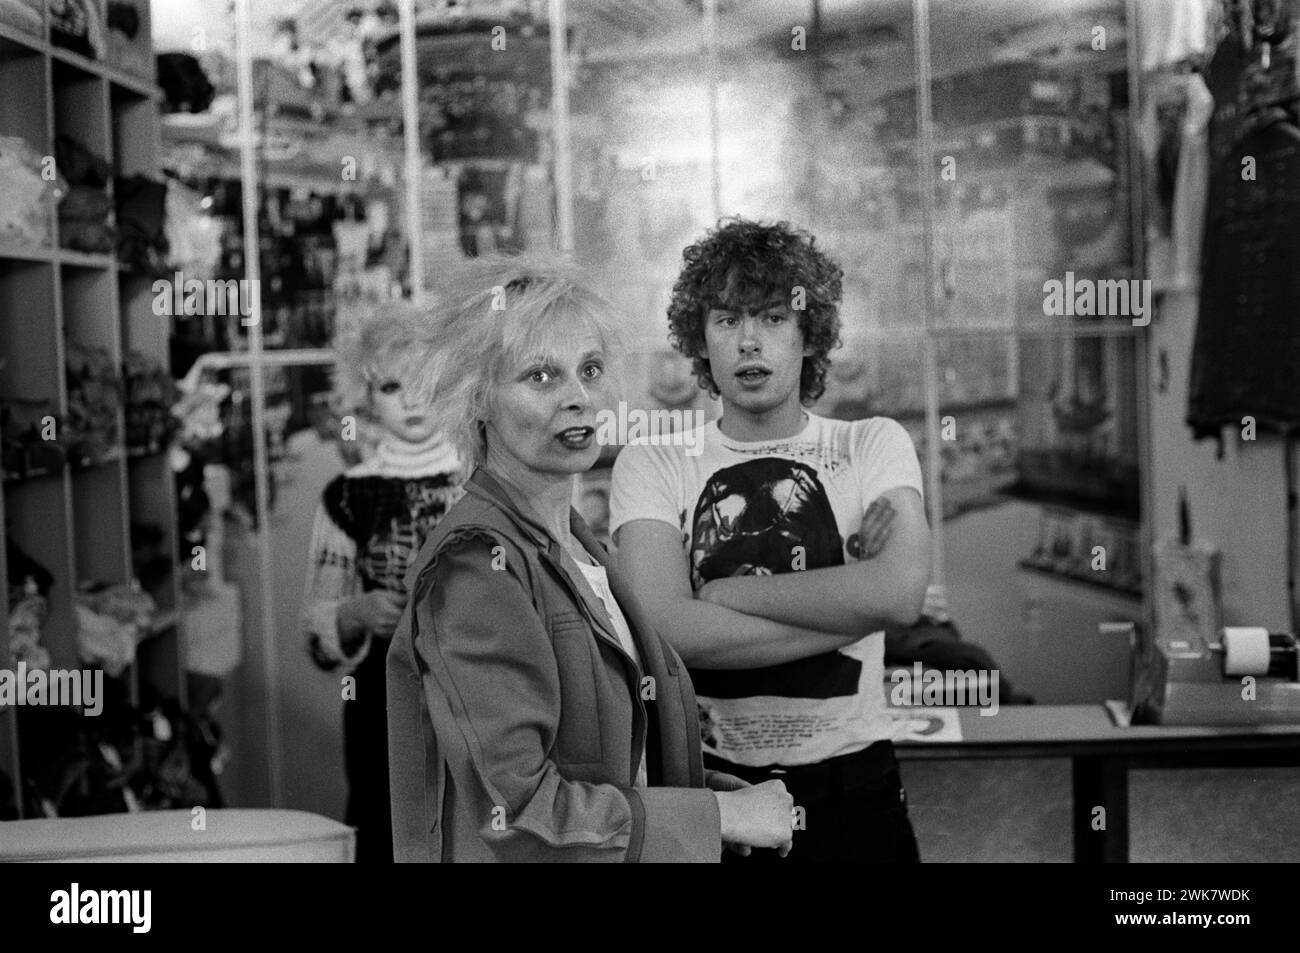 Vivienne Westwood wearing a felt Inside Out Jacket in her shop Seditionaries in the Kings Road Chelsea. Shop assistants Michael Collins who wears Cambridge Rapist design T shirt, produced by Westwood’s partner Malcolm McLaren a couple of years earlier. Chelsea, London, England 1977 1970s UK HOMER SYKES Stock Photo